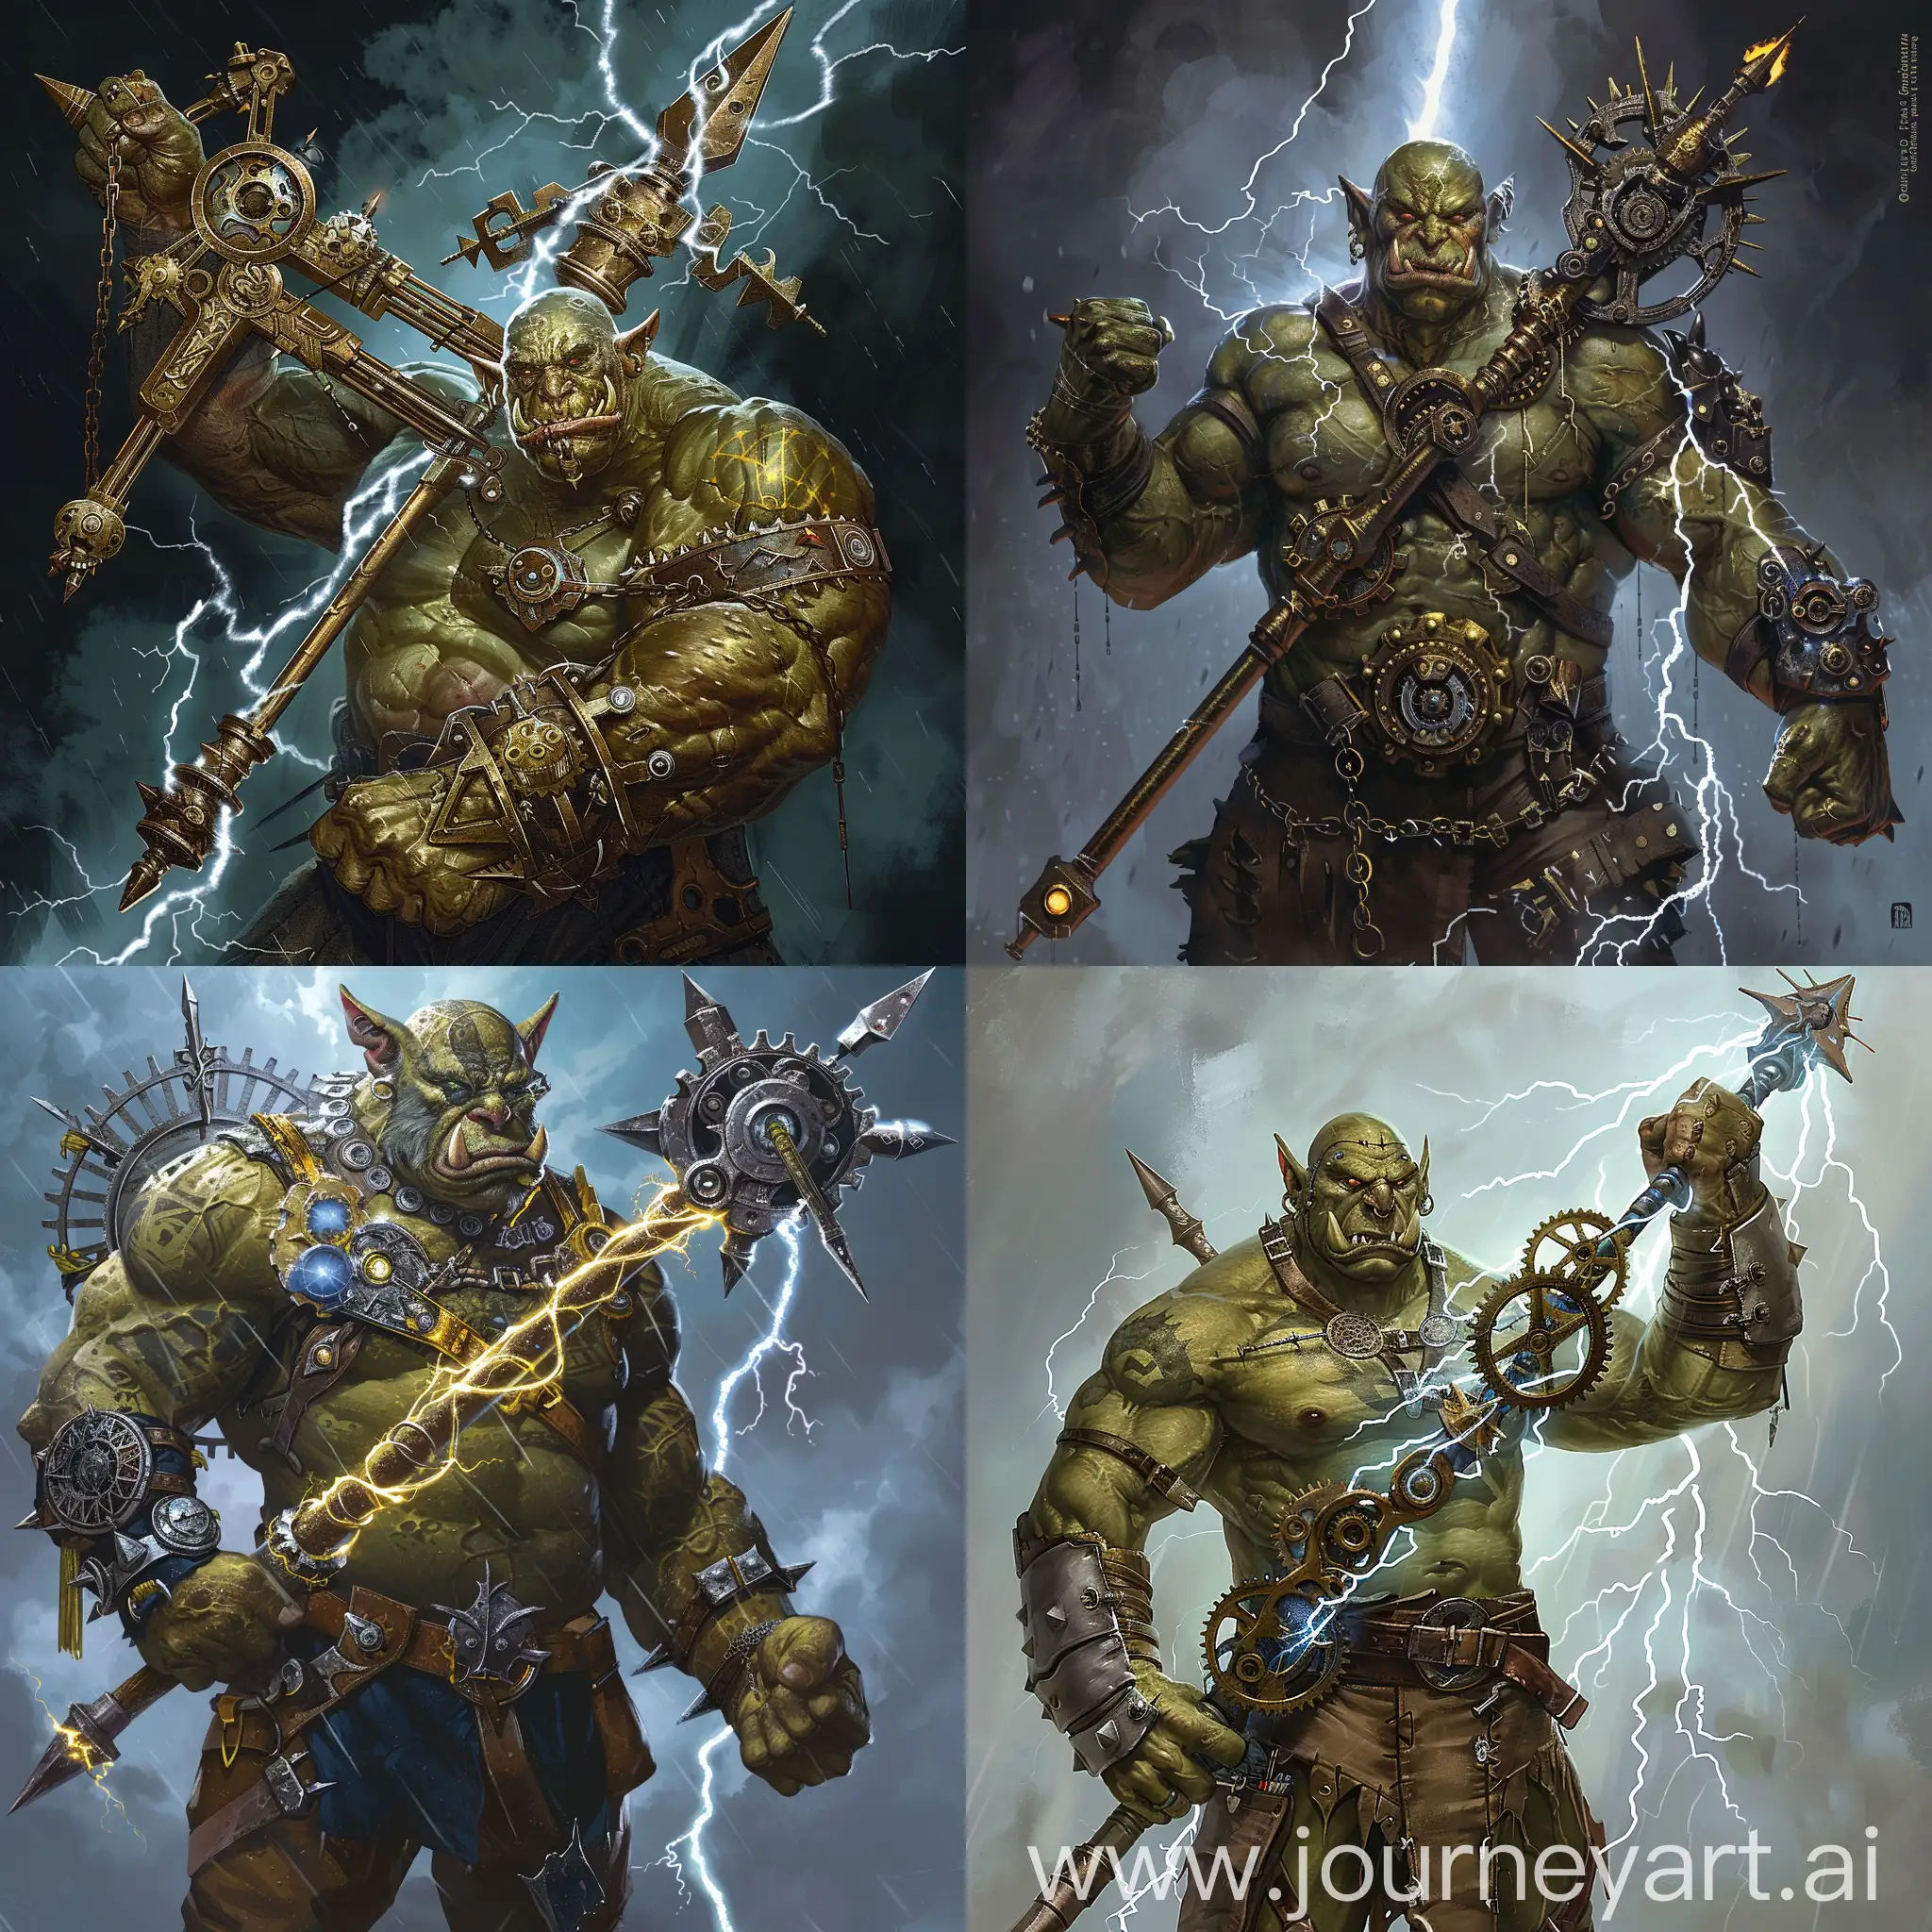 Powerful-Fantasy-Orc-Warrior-Grenwald-Flexing-Muscles-with-Lightning-Spear